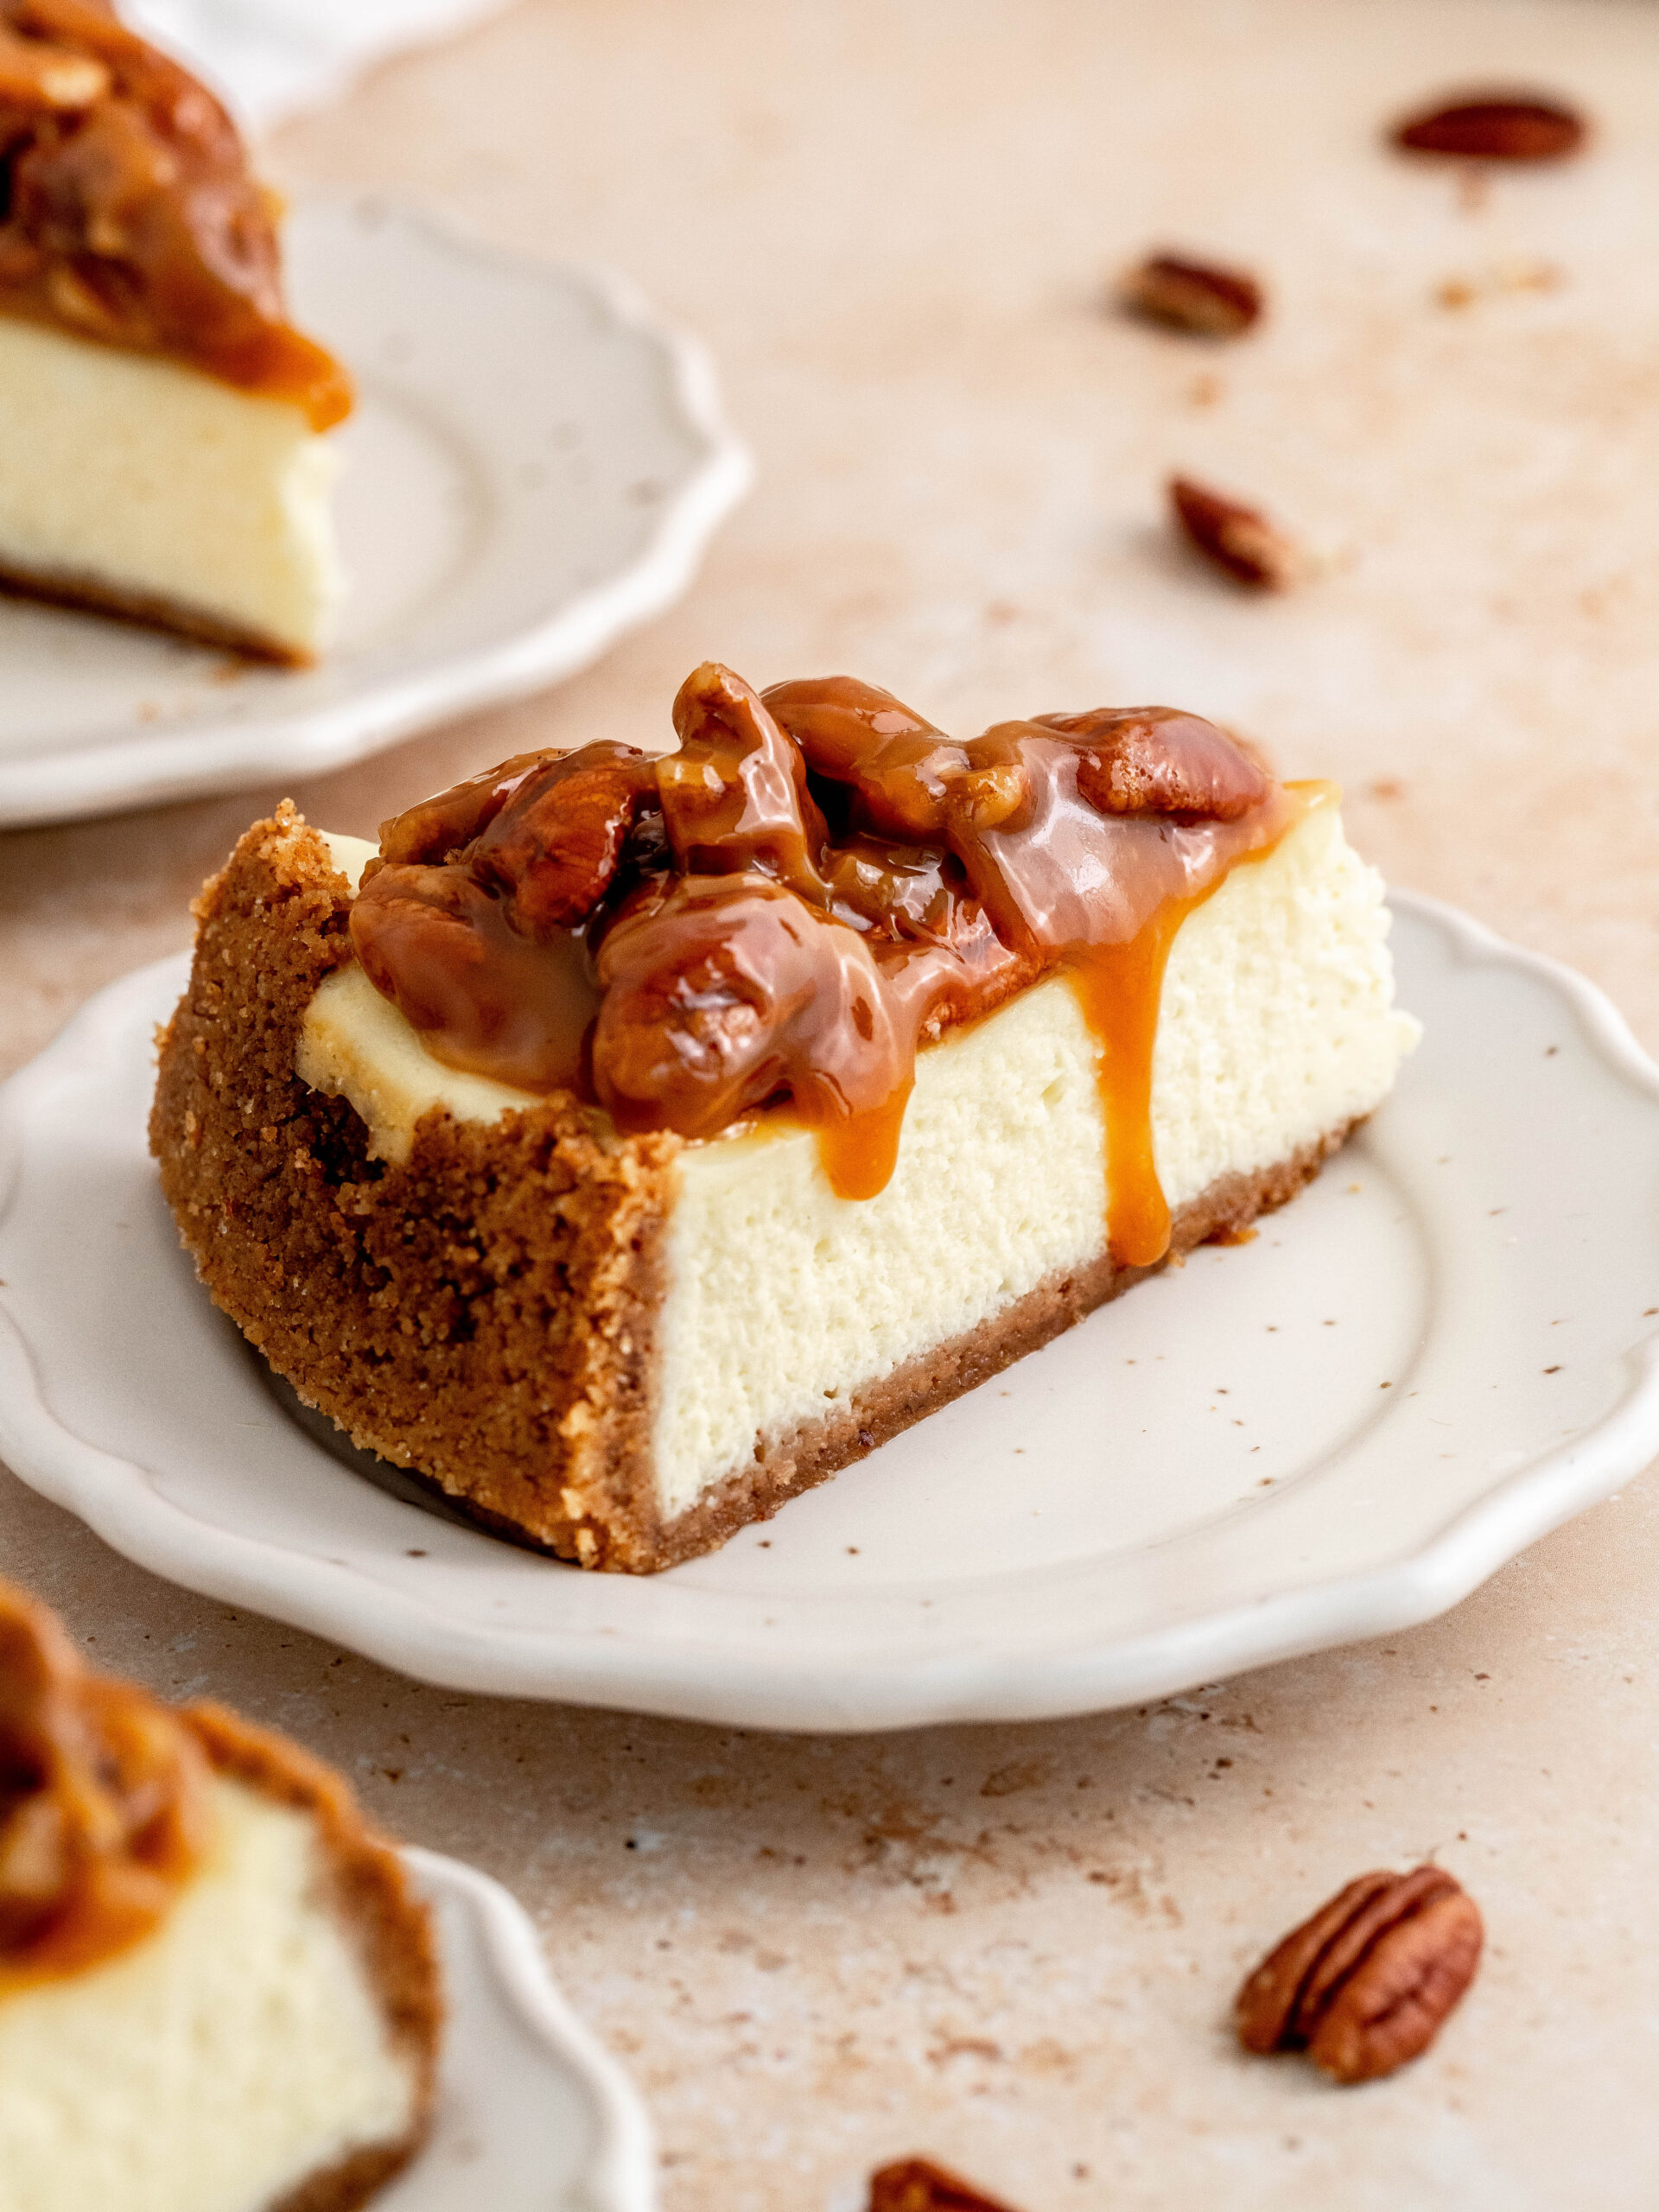 A slice of caramel pecan cheesecake on a plate.